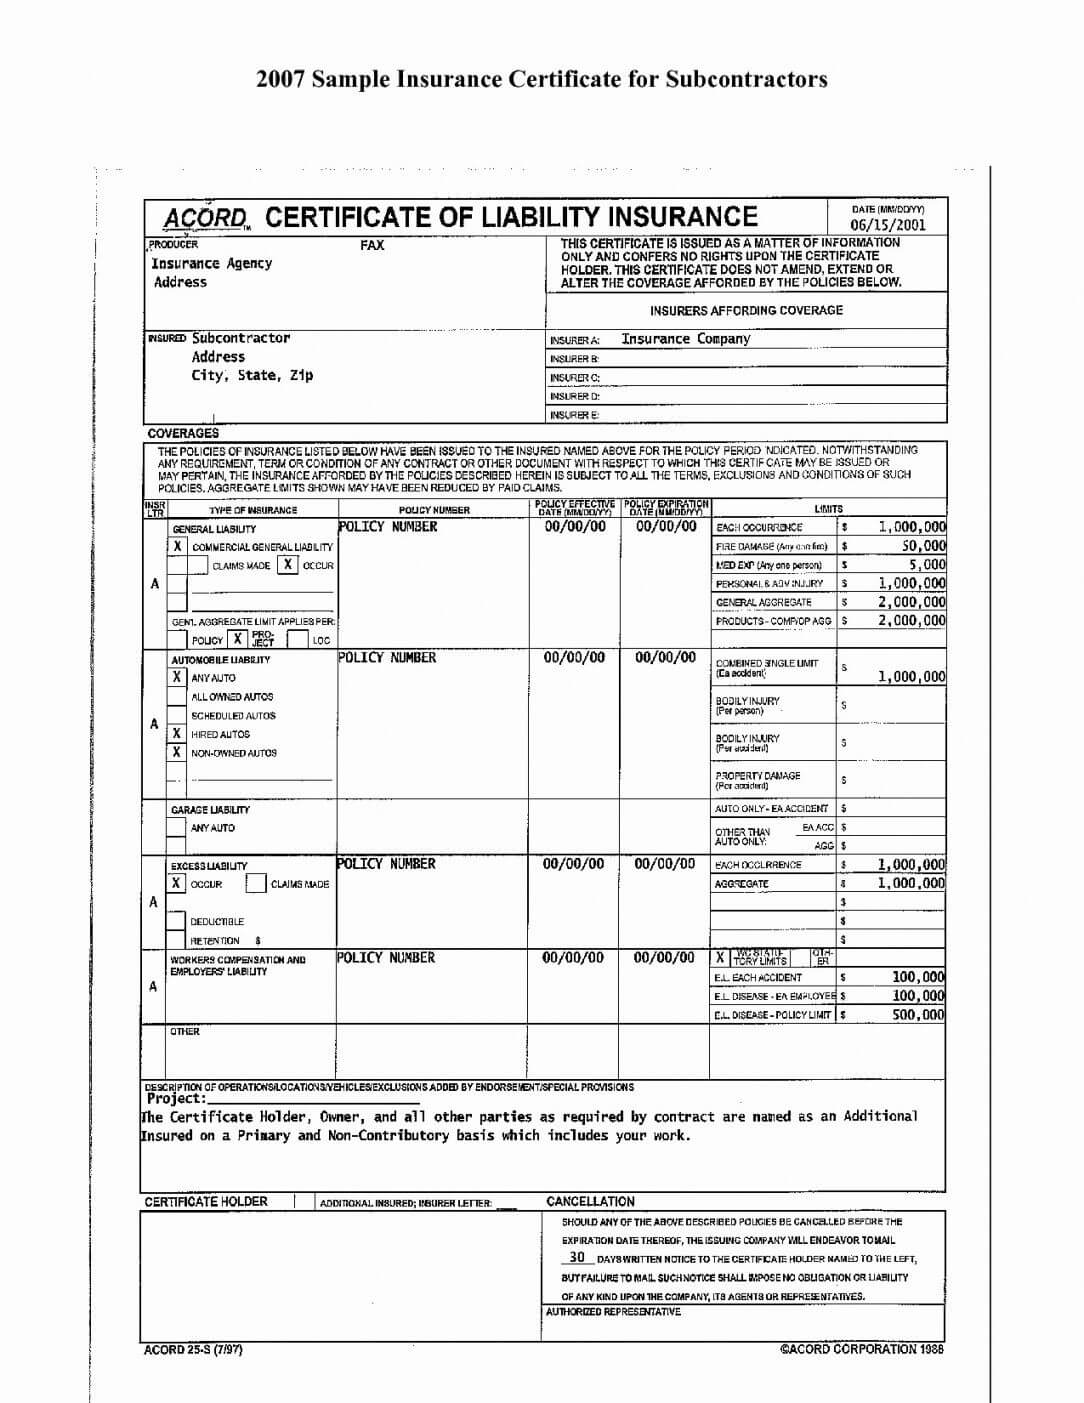 Editable Form Ificate Of Liability Insurance What Is With Acord Insurance Certificate Template